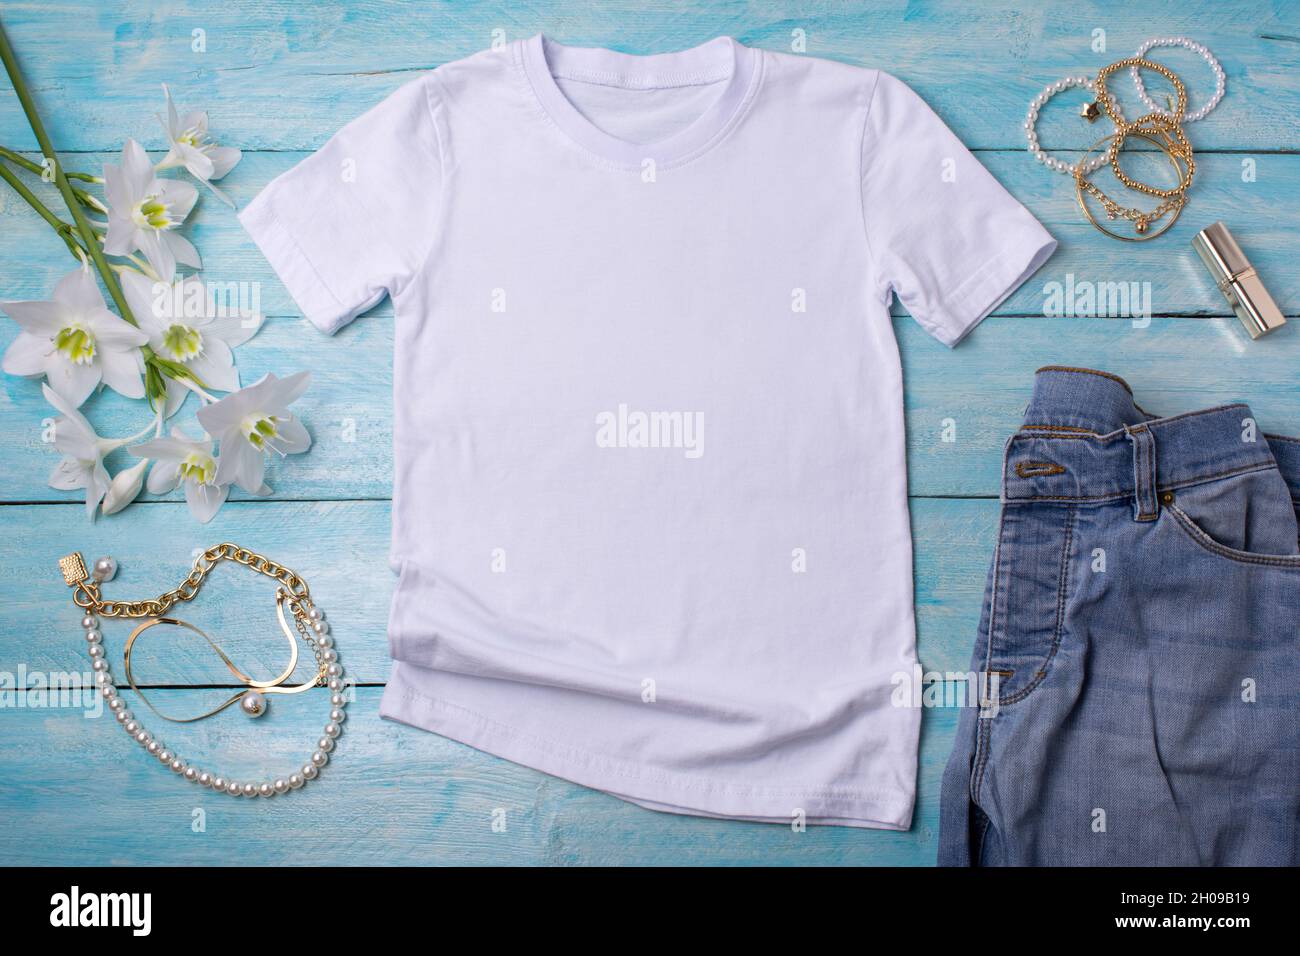 White womens cotton T-shirt mockup with white lilies, necklace and lipstick. Design t shirt template, tee print presentation mock up Stock Photo